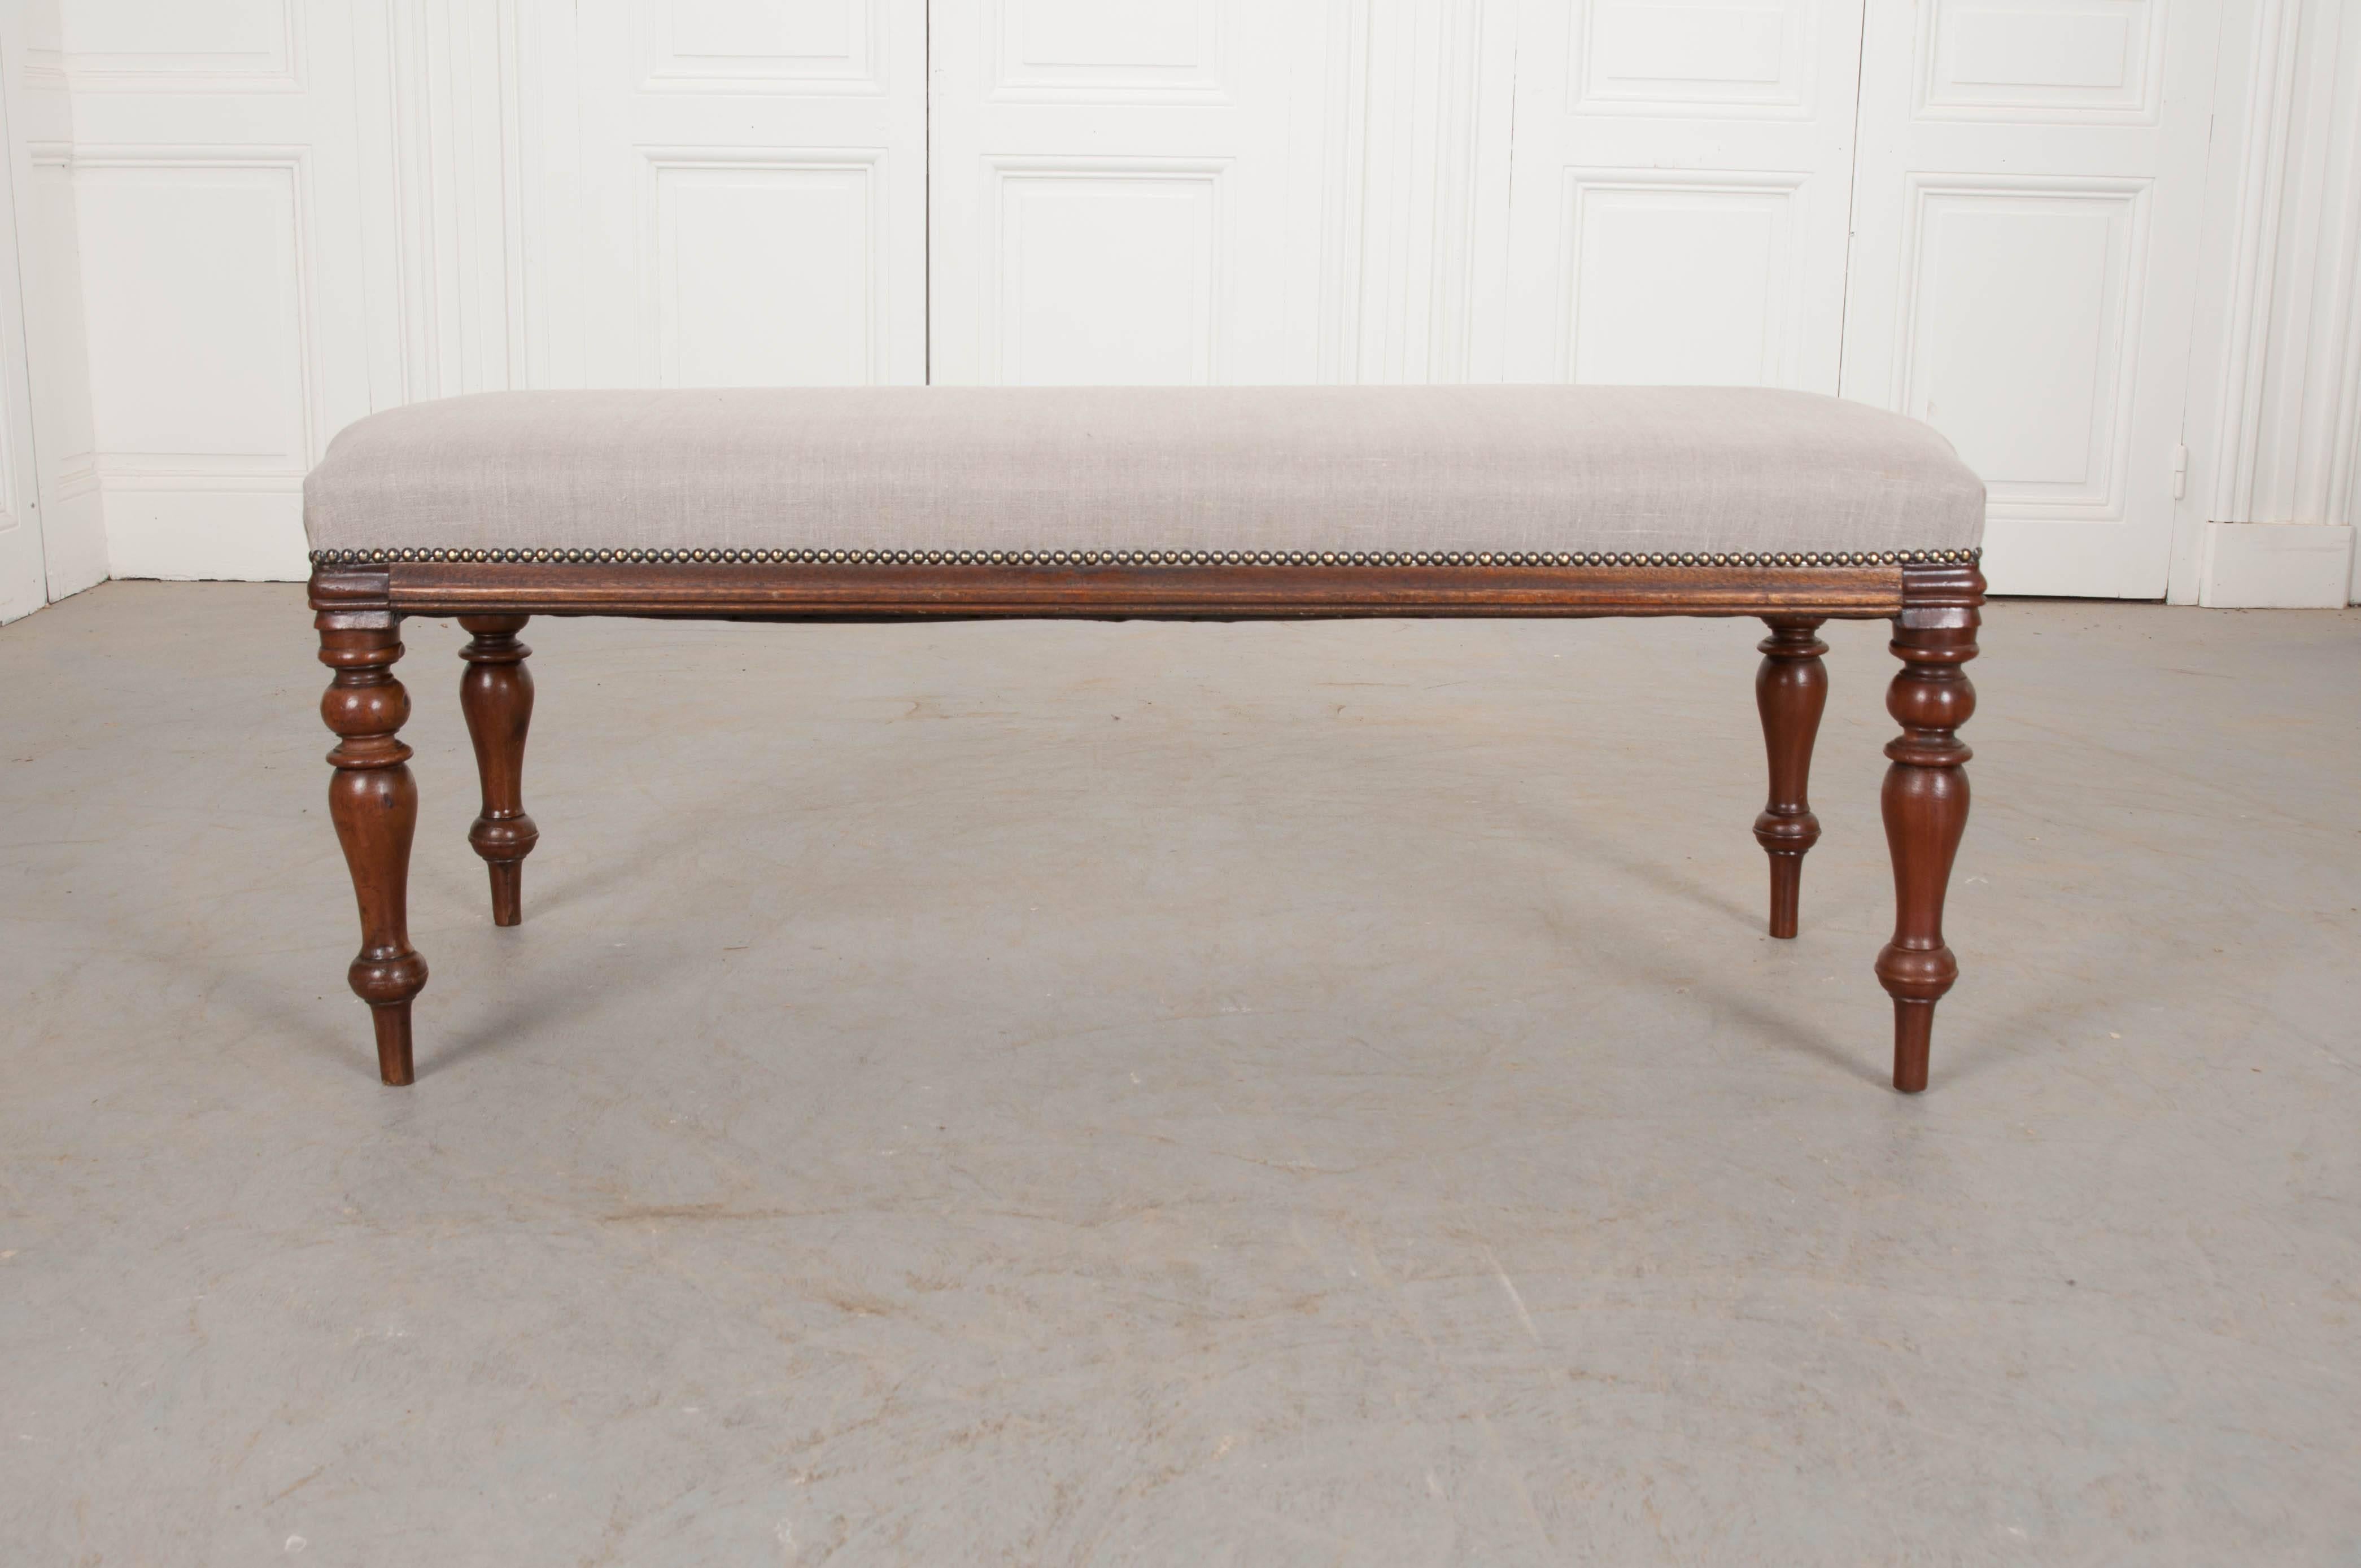 A newly upholstered bench from the end of the 19th century, England. This long, mahogany bench is upholstered in a taupe-colored woven linen with natural fibers that is affixed to the frame using antiqued metal nail heads. The bench is lifted on